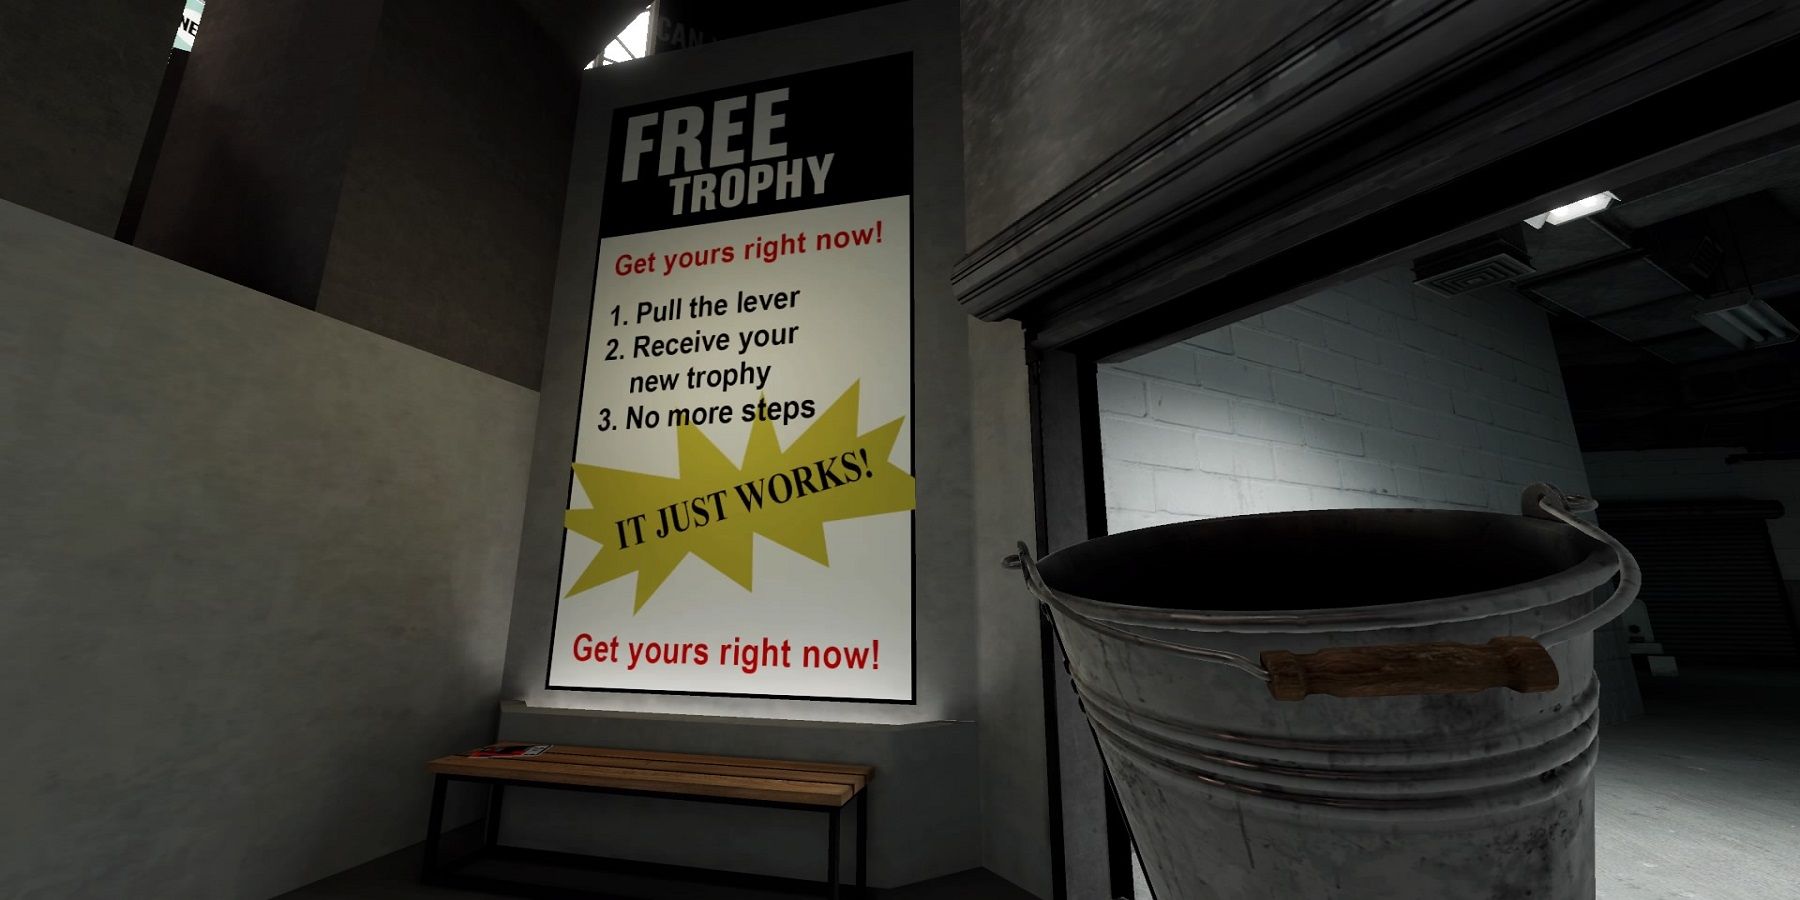 The Stanley Parable - Ultra Deluxe Free Trophy